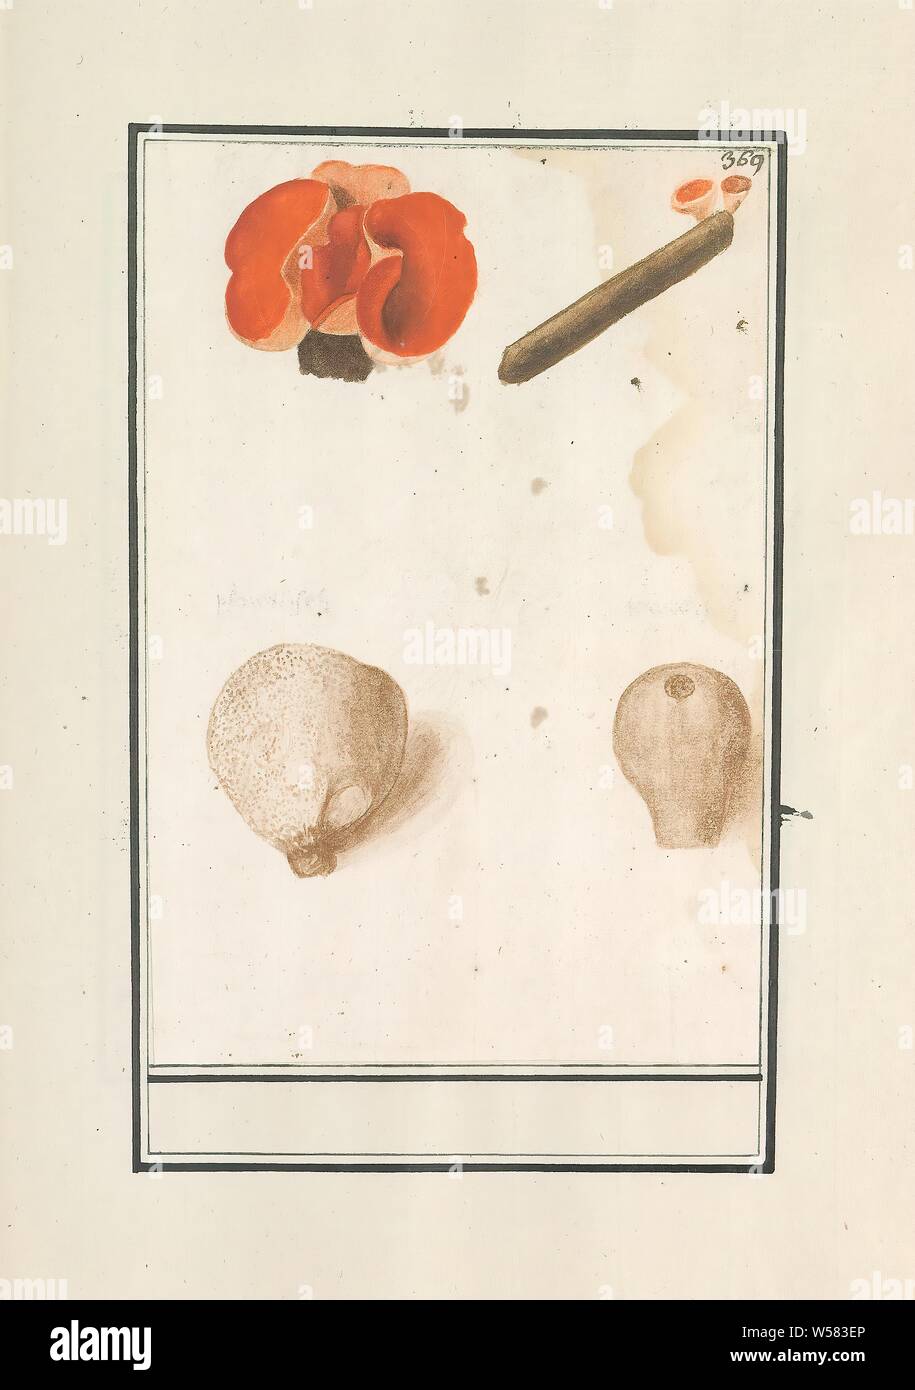 Bovist and red cup mushroom (Sarcoscypha coccinea), Bovist and red cup mushroom. Numbered top right: 369. Part of the fourth album with drawings of flowers and mushrooms. Eleventh of twelve albums with drawings of animals, birds and plants known around 1600, commissioned by Emperor Rudolf II. With explanation in Dutch, Latin and French, mushrooms, Anselmus Boetius de Boodt, 1596 - 1610, paper, watercolor (paint), deck paint, chalk, brush, h 229 mm × w 152 mm Stock Photo